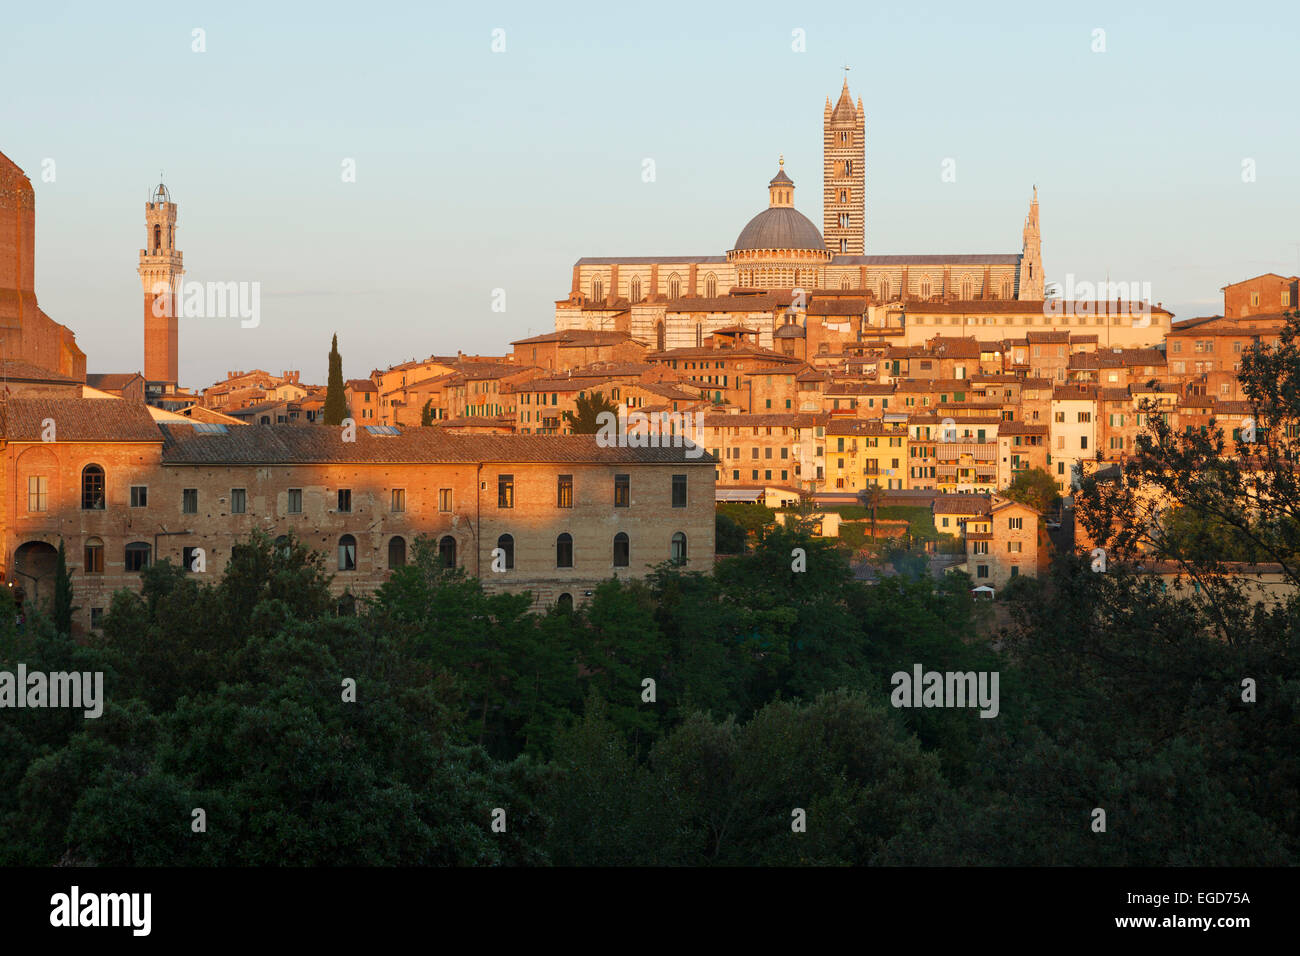 Cityscape with Torre del Mangia bell tower, town hall and Duomo Santa Maria cathedral, Siena, UNESCO World Heritage Site, Tuscany, Italy, Europe Stock Photo